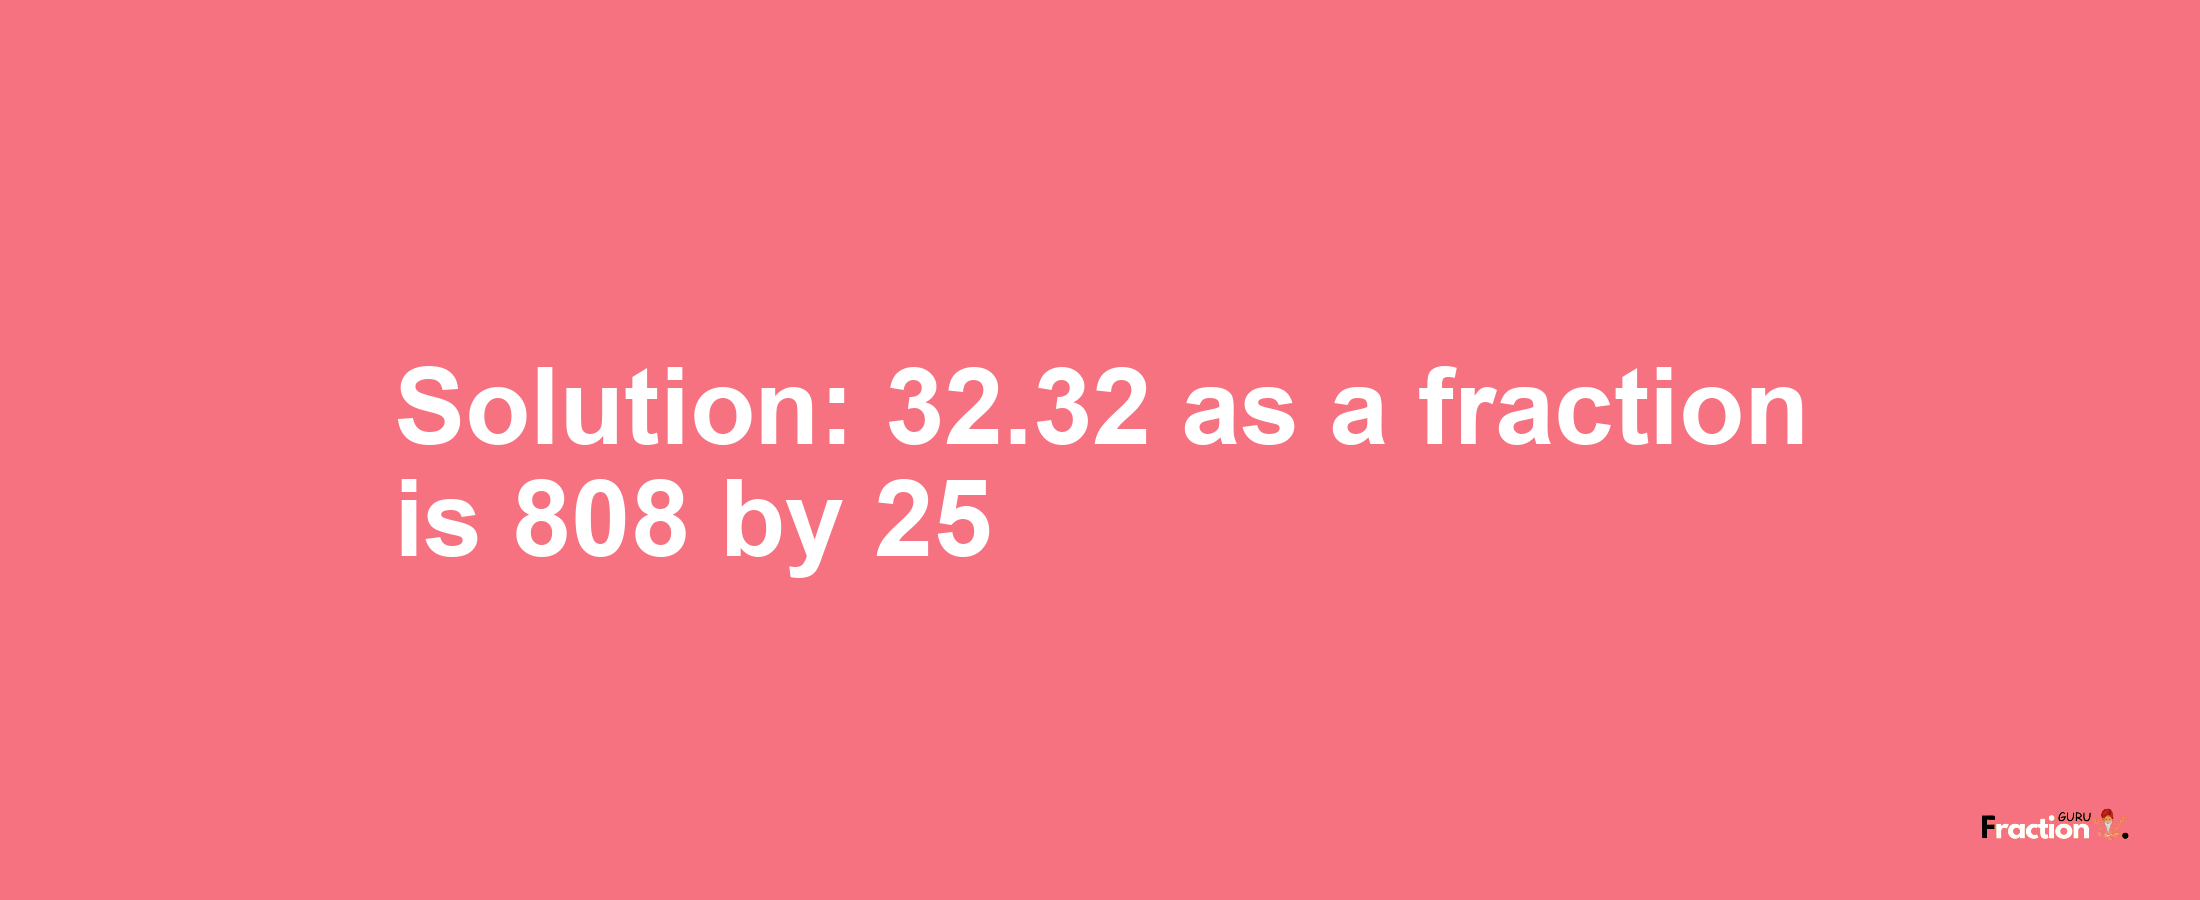 Solution:32.32 as a fraction is 808/25